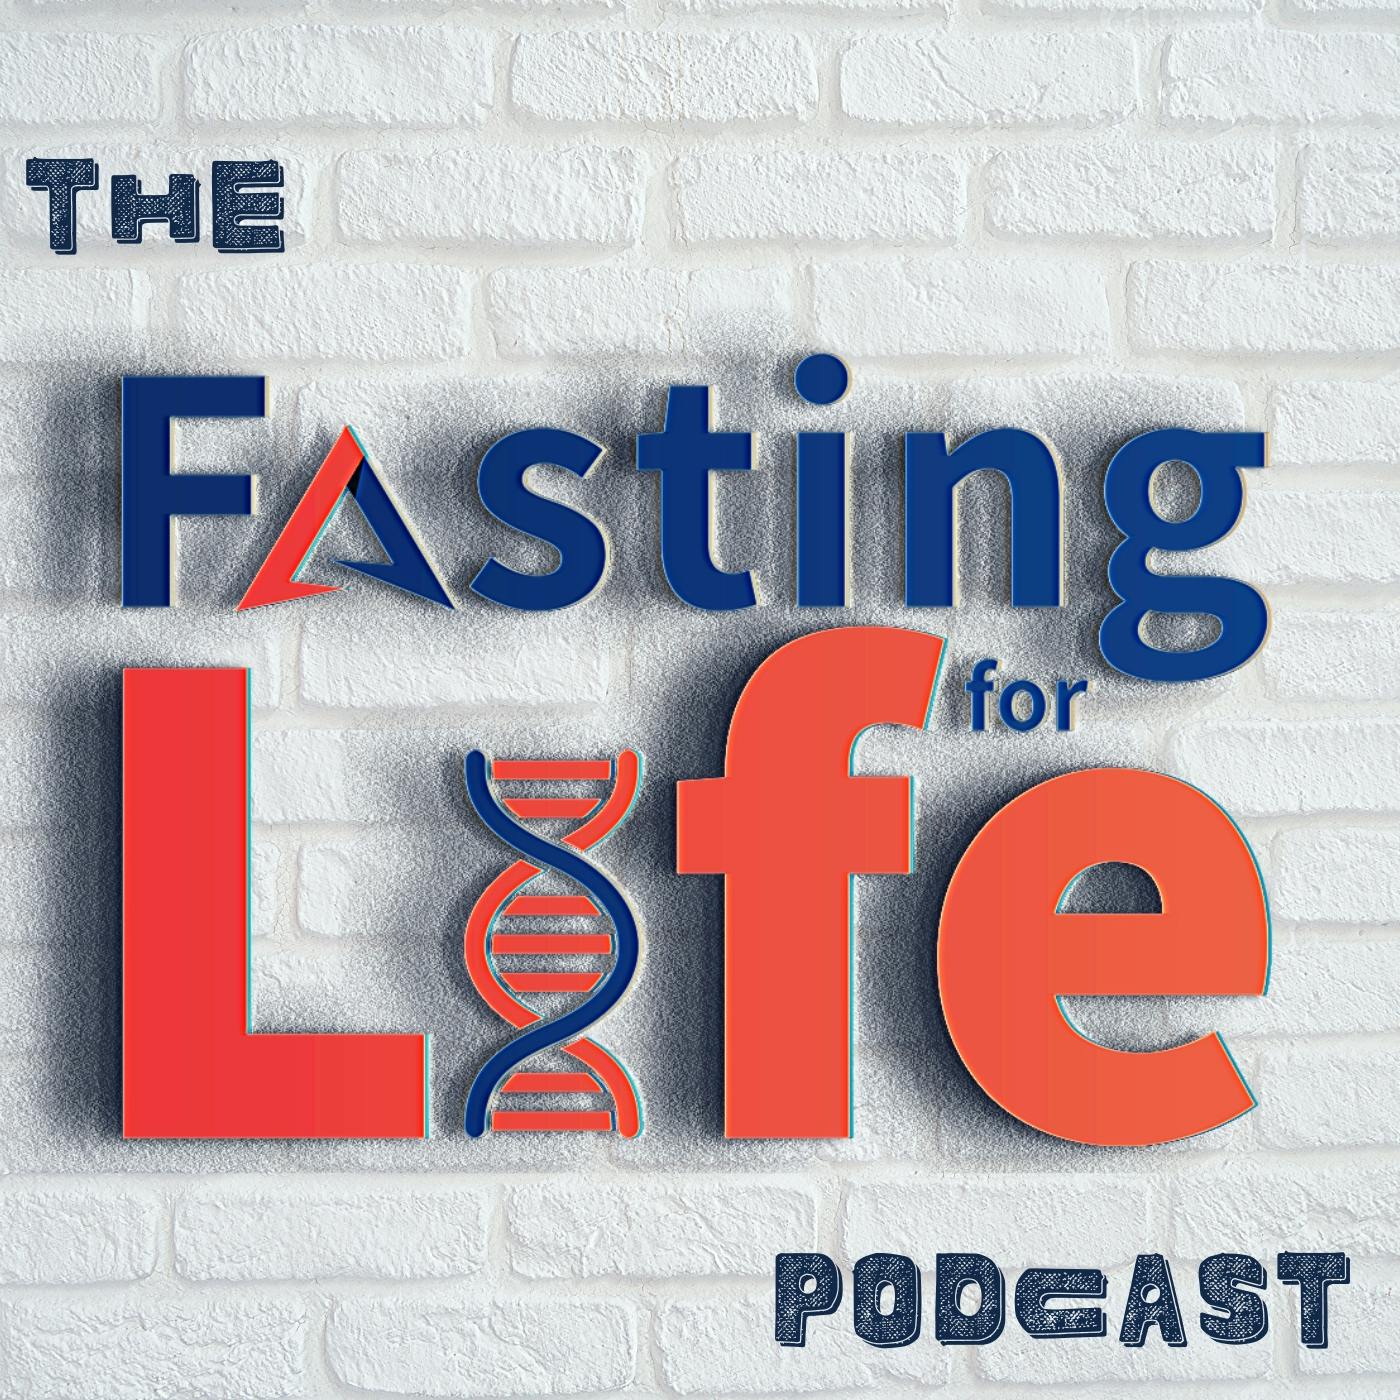 Ep. 26 - Making intermittent fasting excuses, mental fatigue, losing momentum in weight loss plateaus | Nobody's perfect, 72-hour fast to reach new lows on your fasting plan | One Meal a Day Fasting P